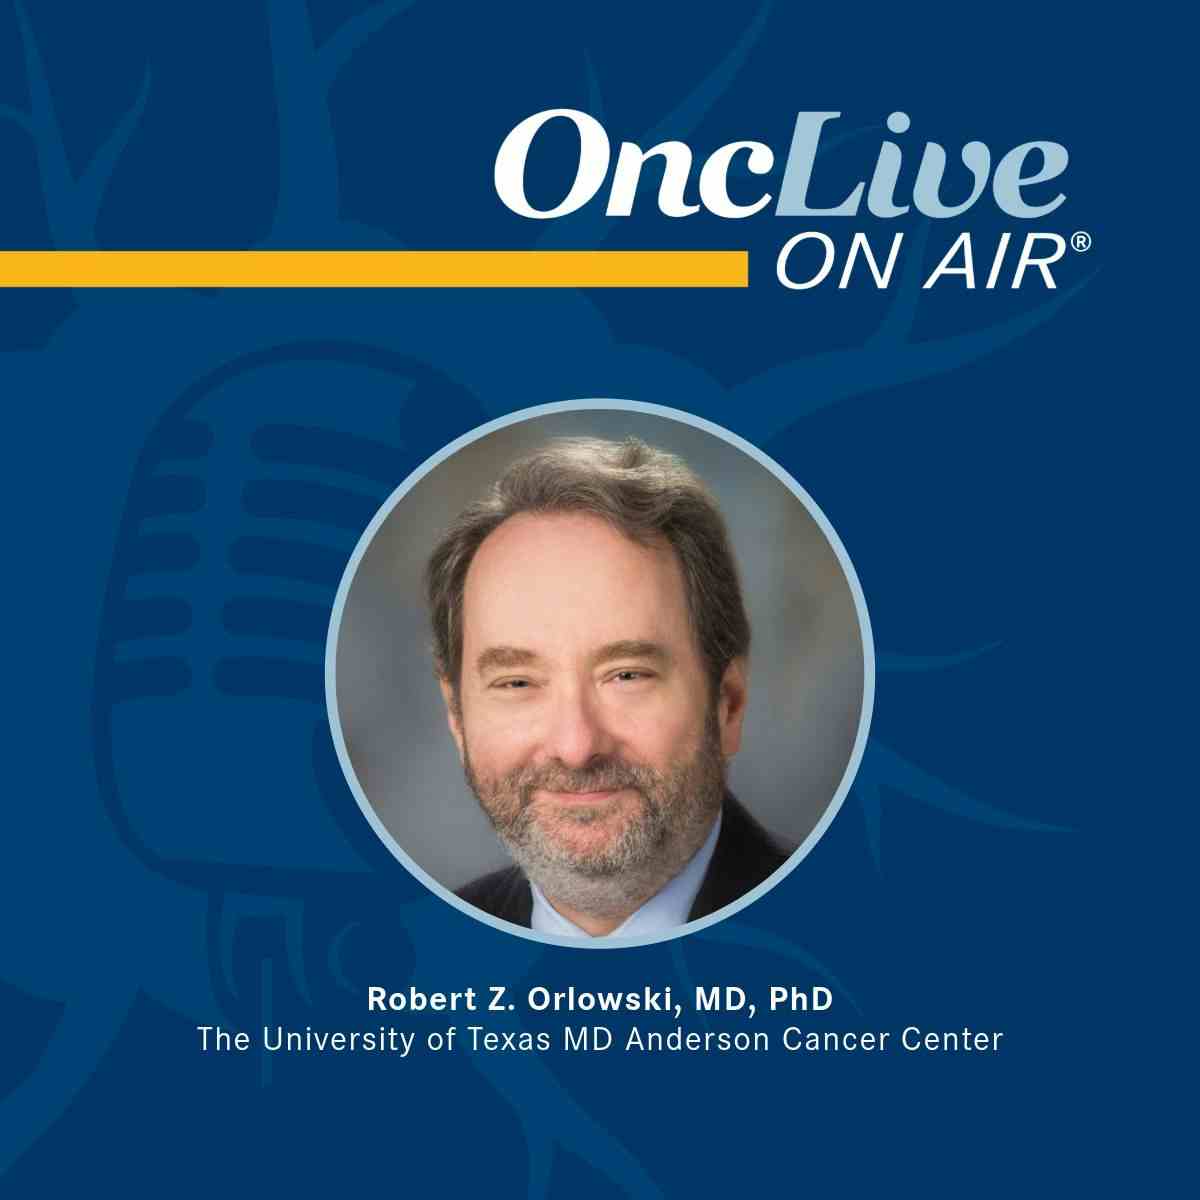 Robert Z. Orlowski, MD, PhD, Florence Maude Thomas Cancer Research Professorship, Department of Lymphoma/Myeloma, director, Section of Myeloma, professor, Department of Experimental Therapeutics, Division of Cancer Medicine, The University of Texas MD Anderson Cancer Center